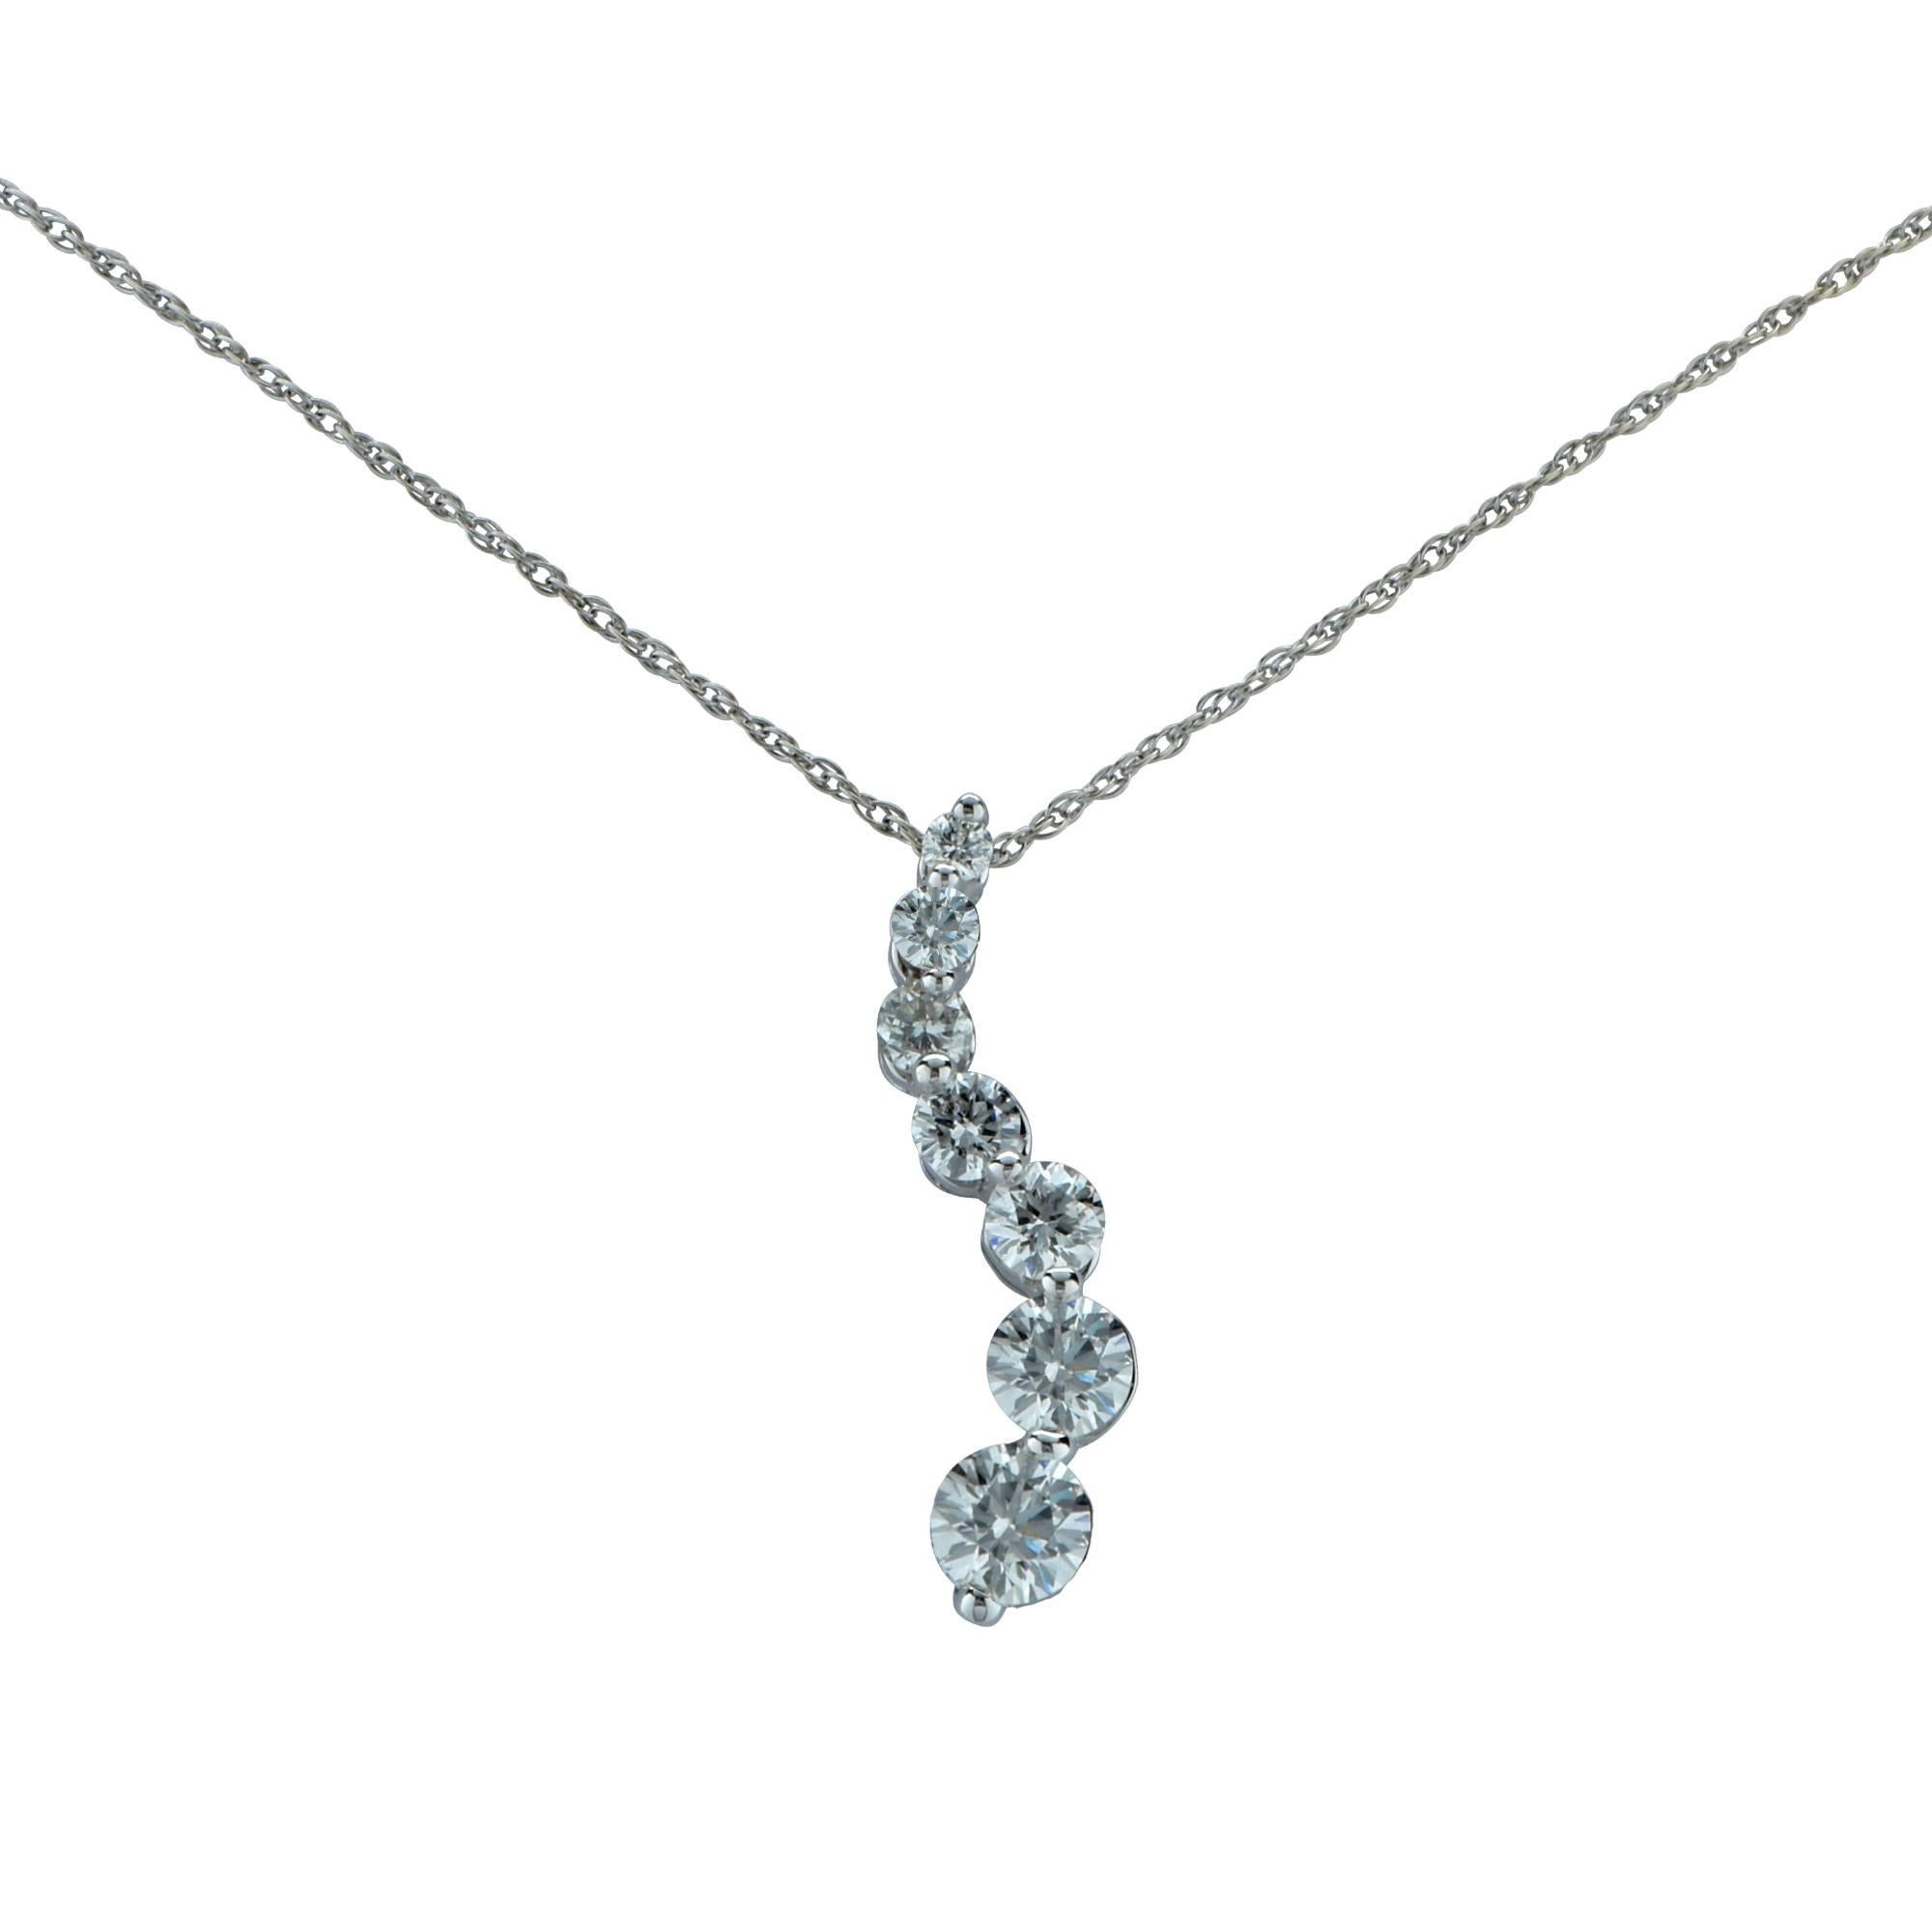 Modern White Gold Necklace and Diamond Drop Pendant